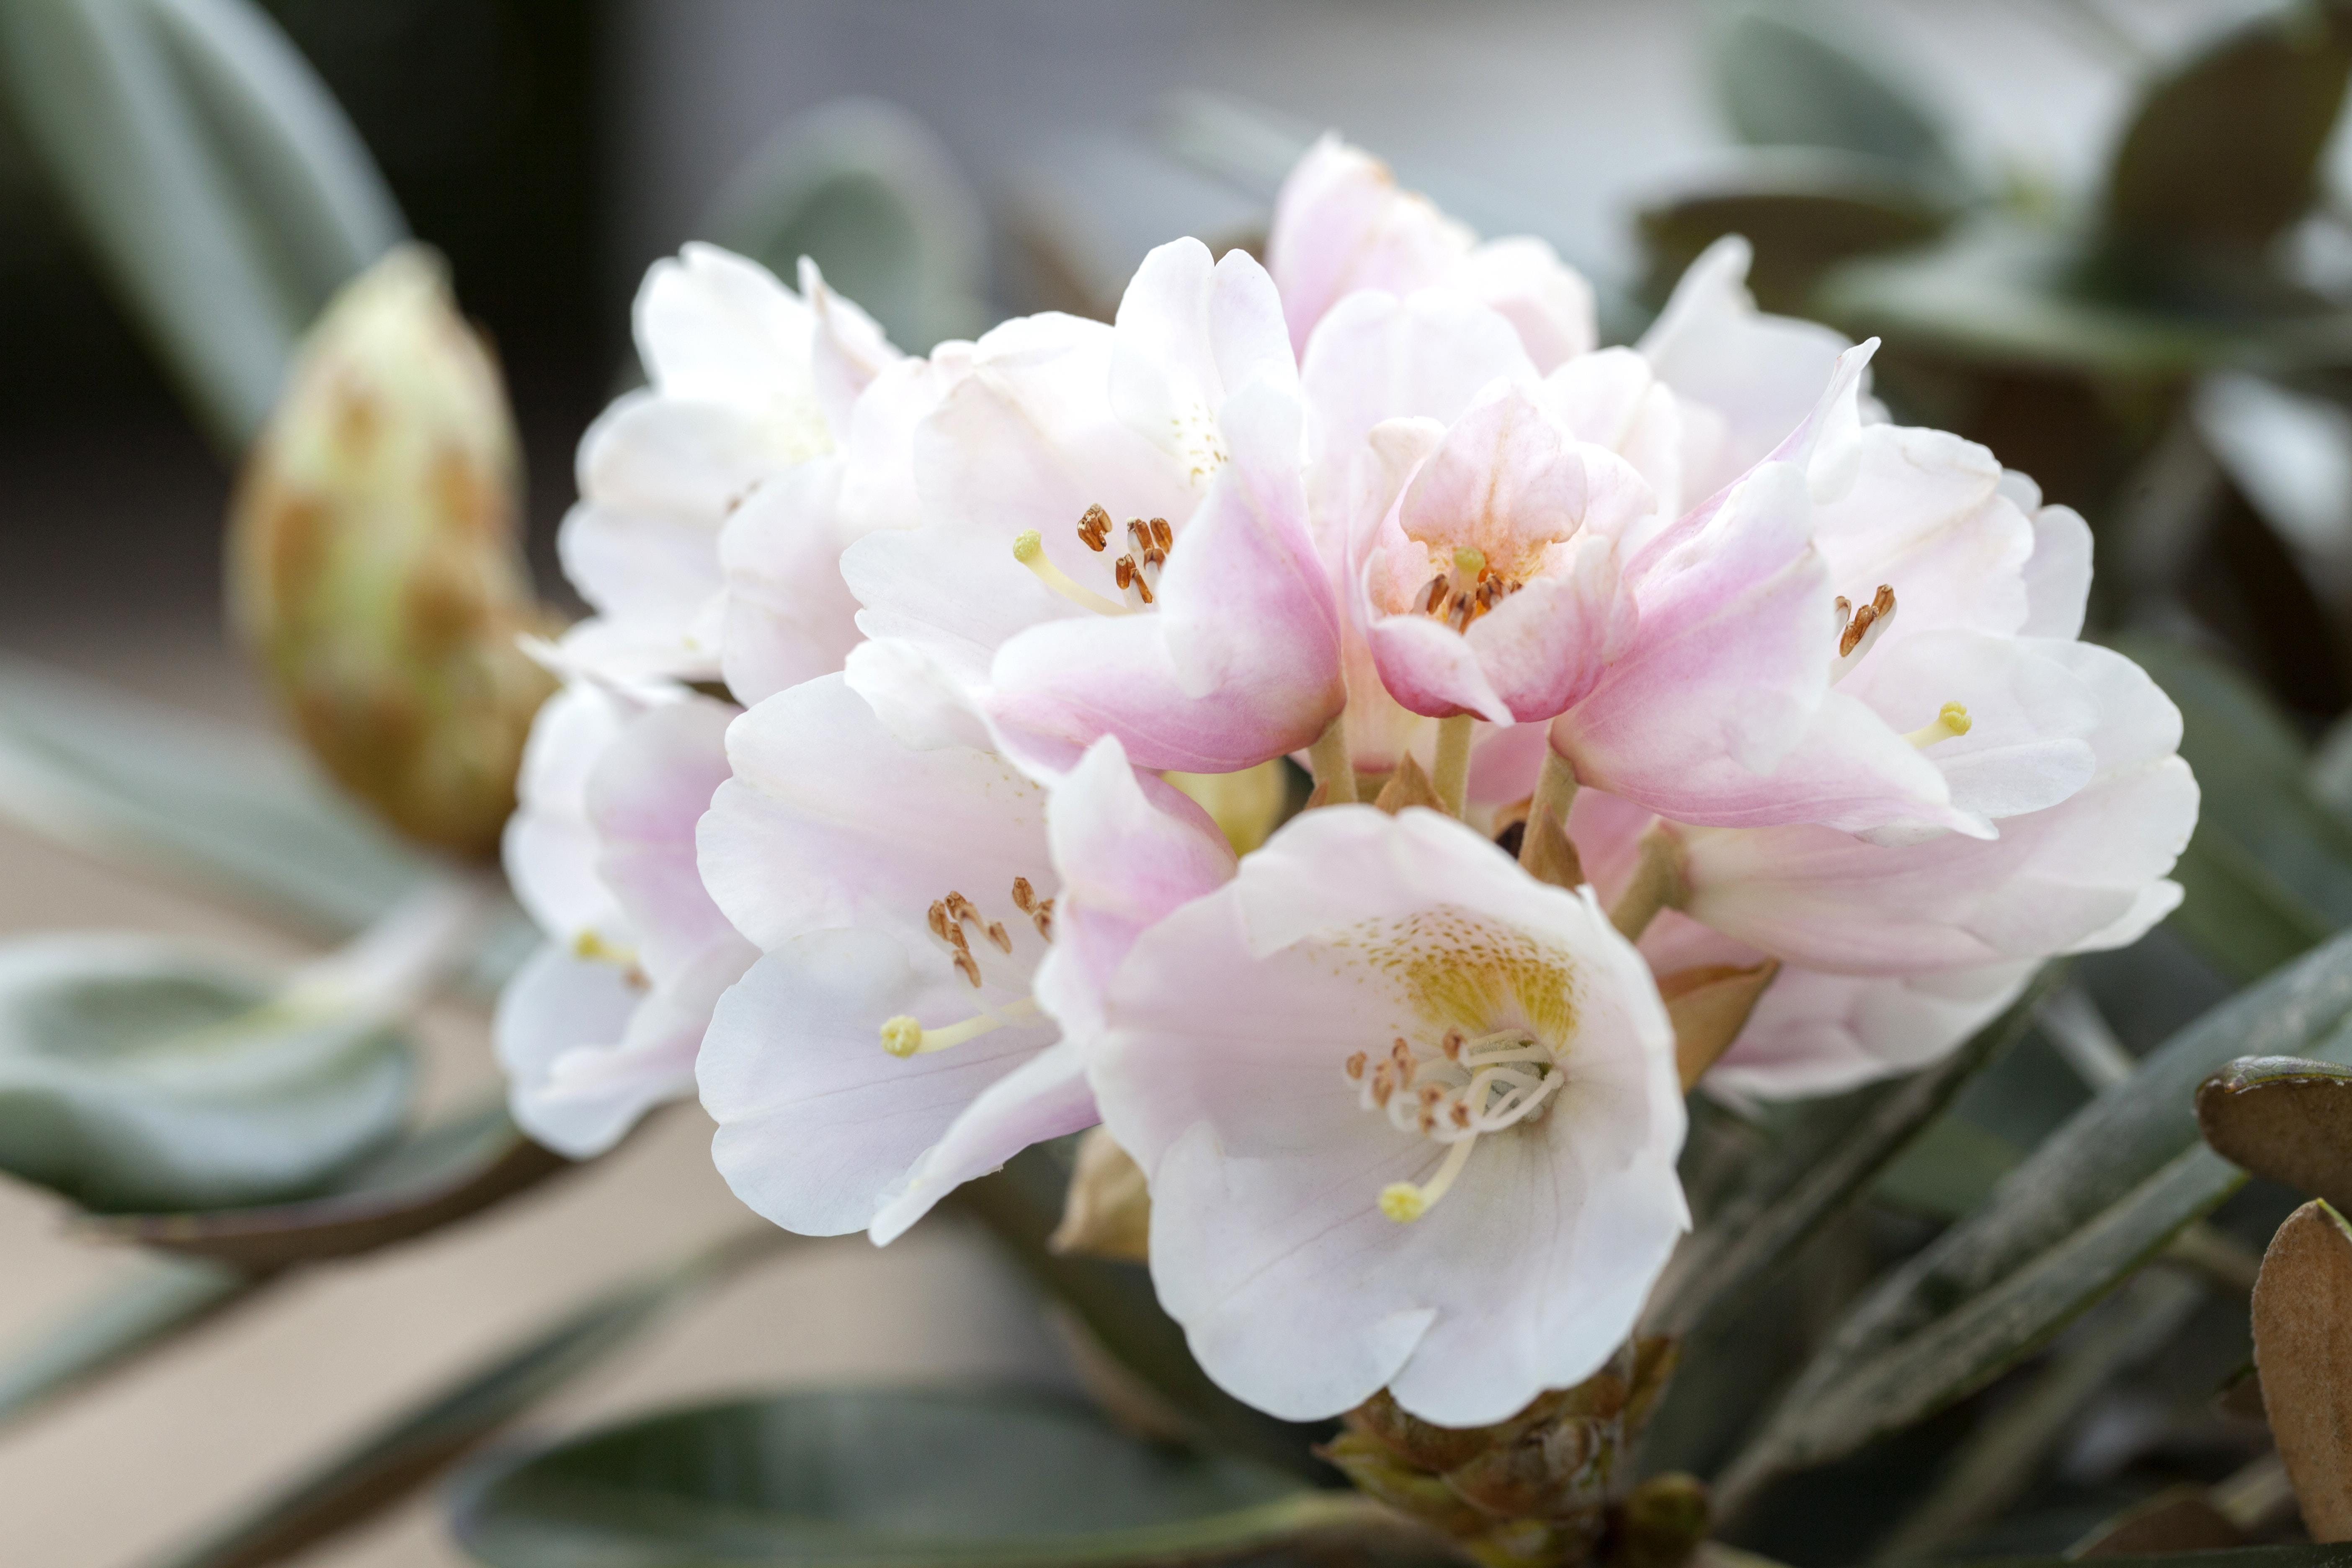 Rhododendron 'Silbervelours' • Rhododendron pachysanthum 'Silbervelours'